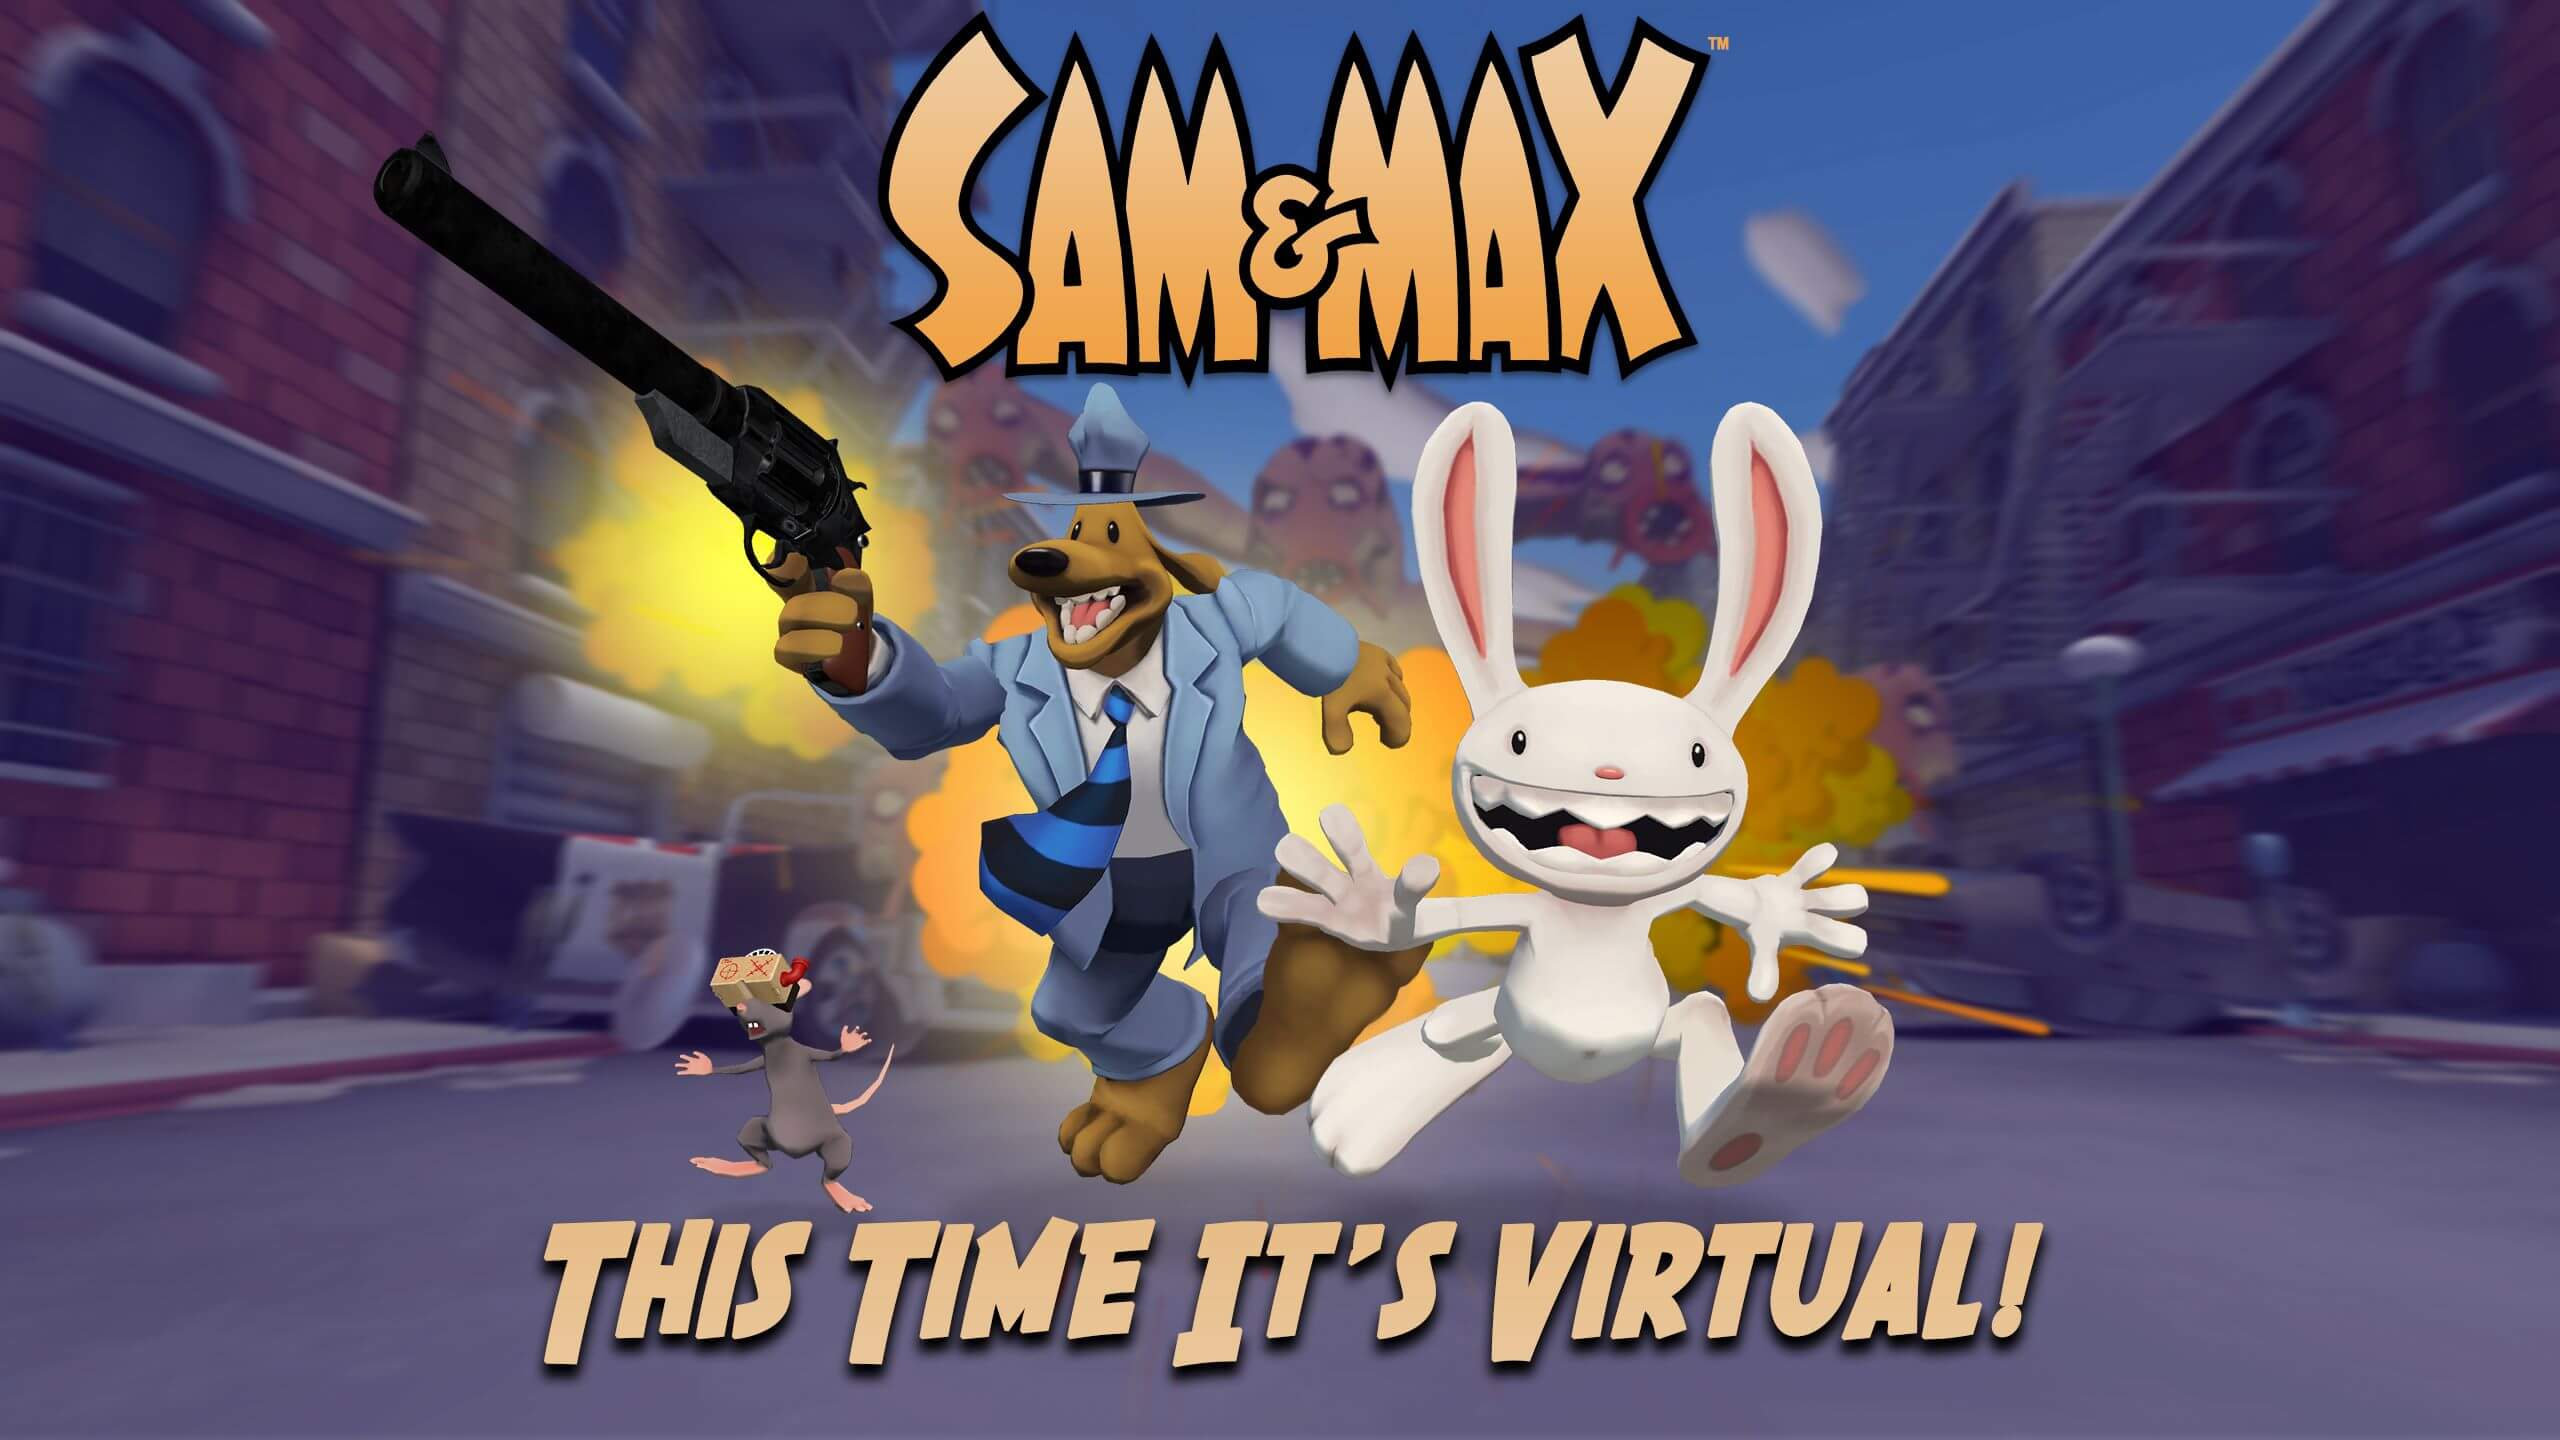 Sam and Max: This Time It’s Virtual PS4 Free Download